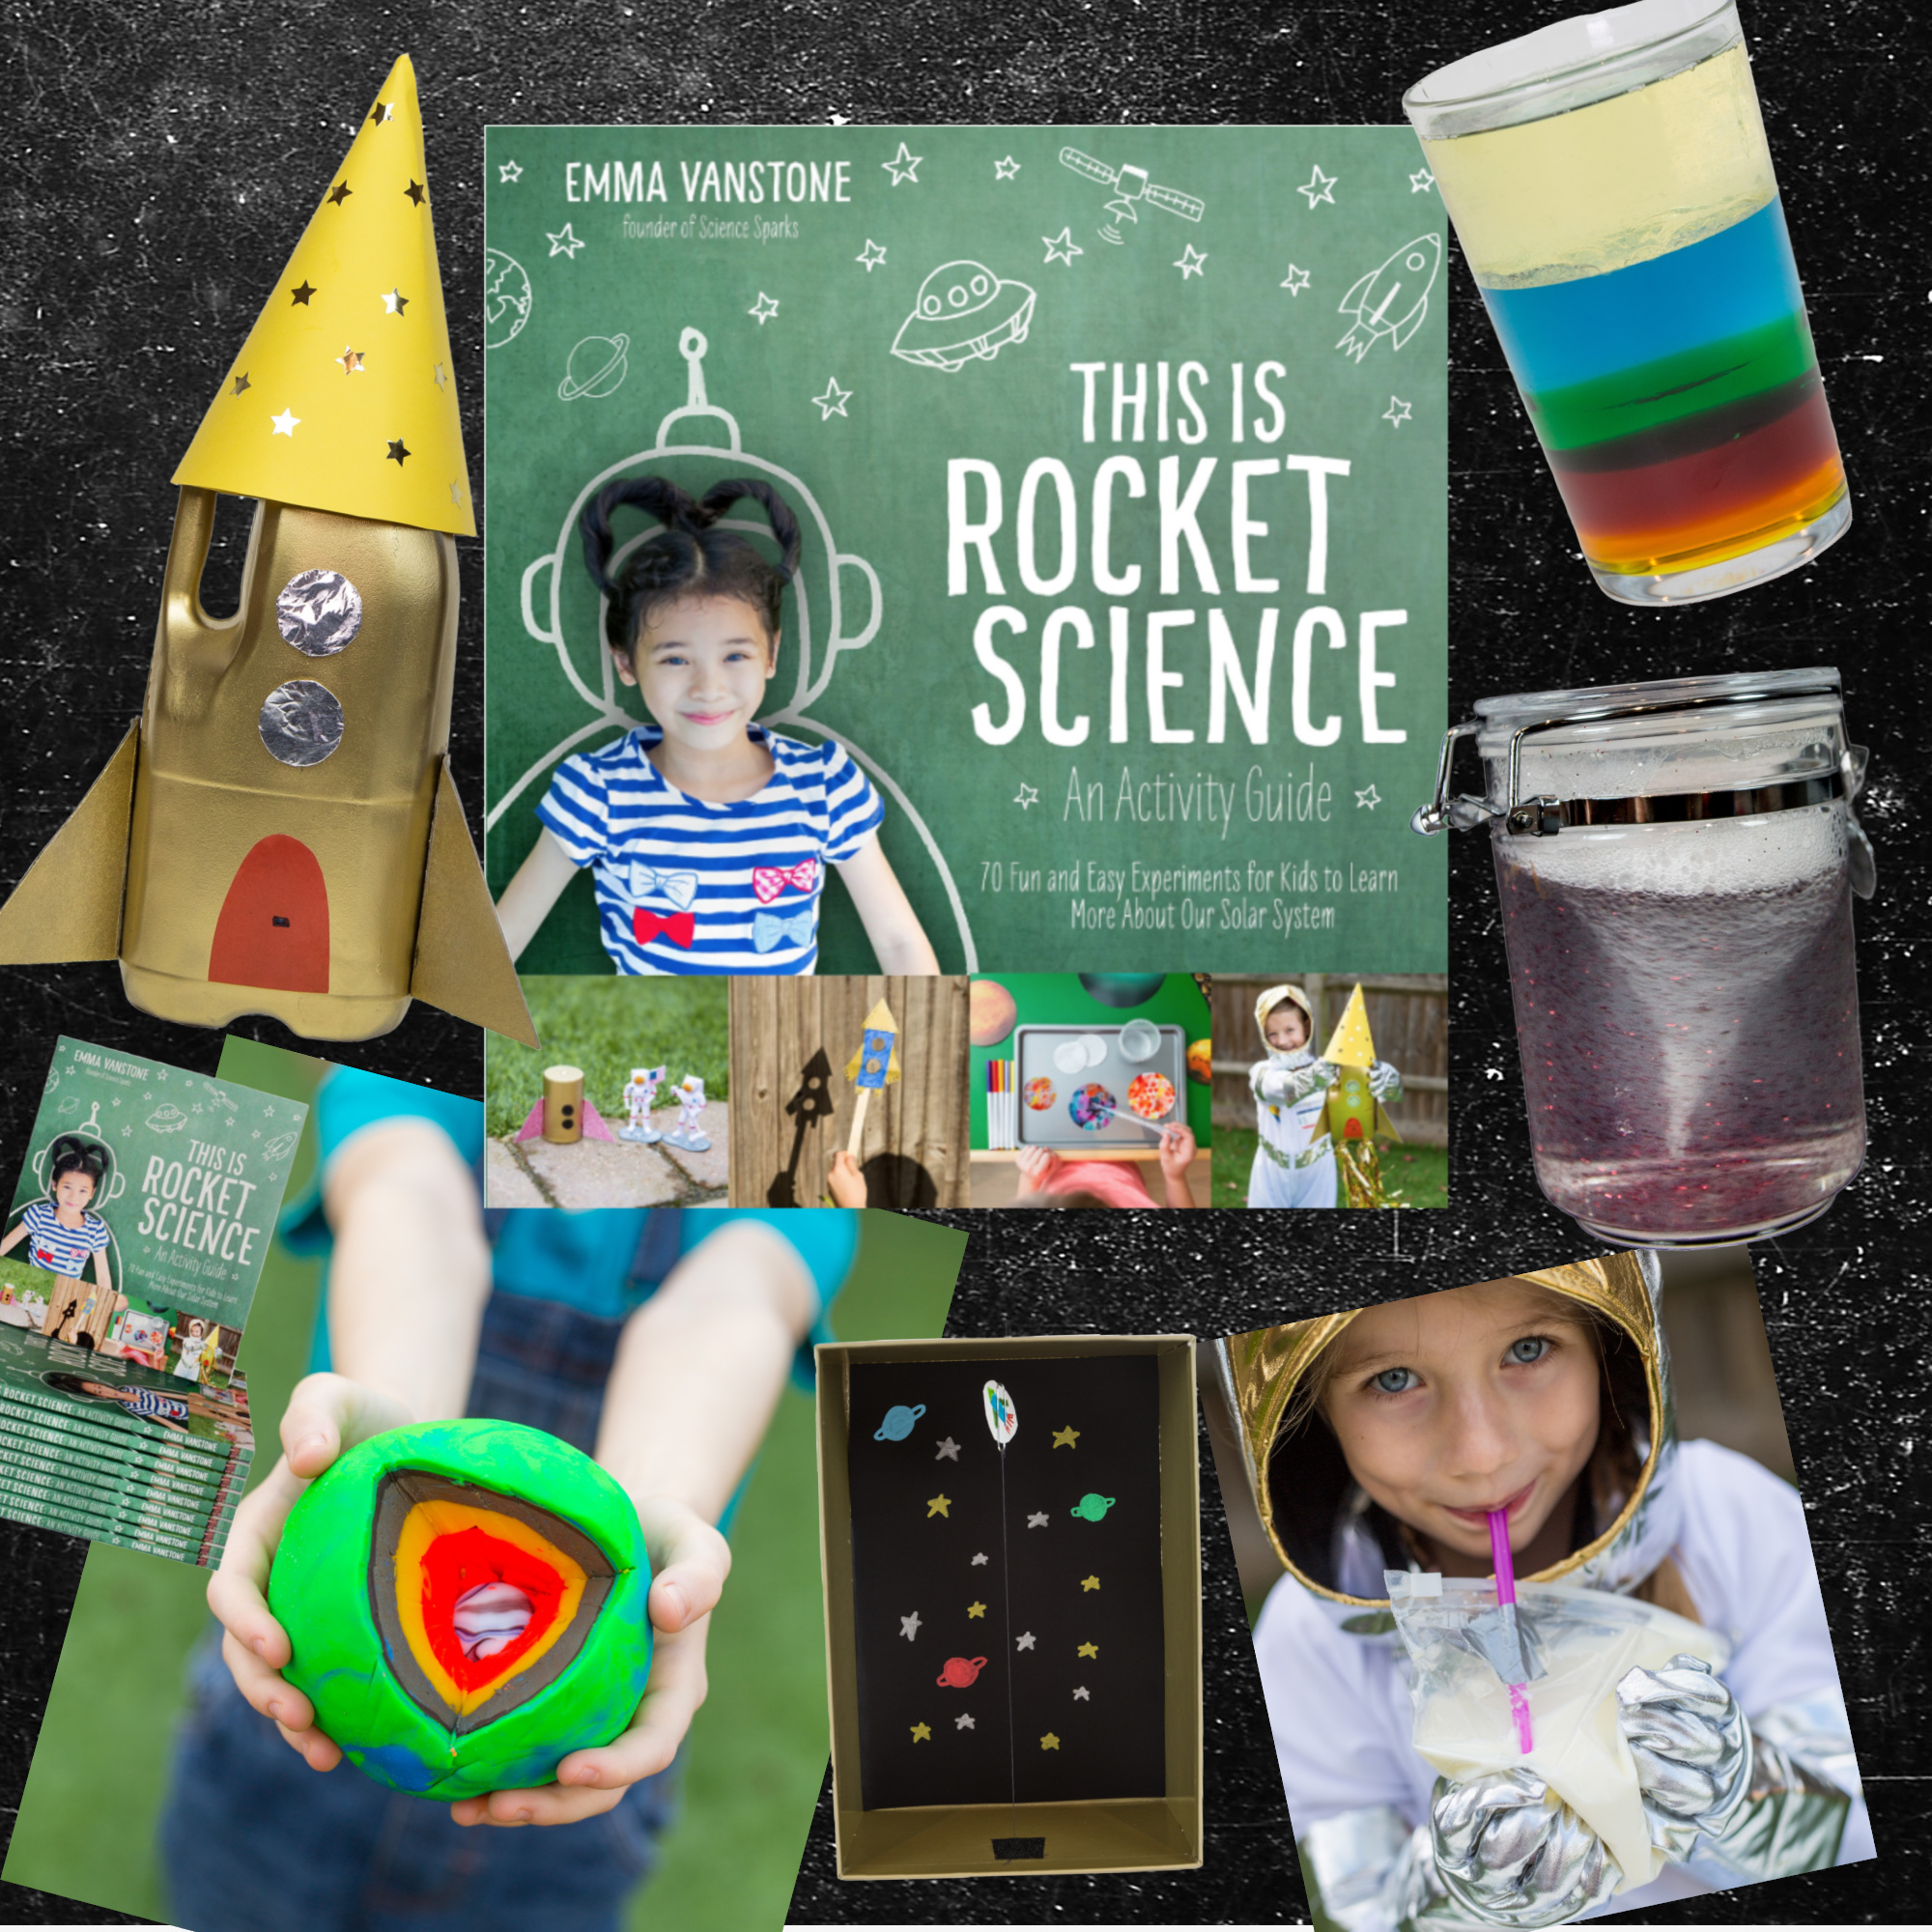 This IS Rocket Science book and sample experiments from the book. Includes a play dough earth model, rocket mouse, storm in a jar and density jar